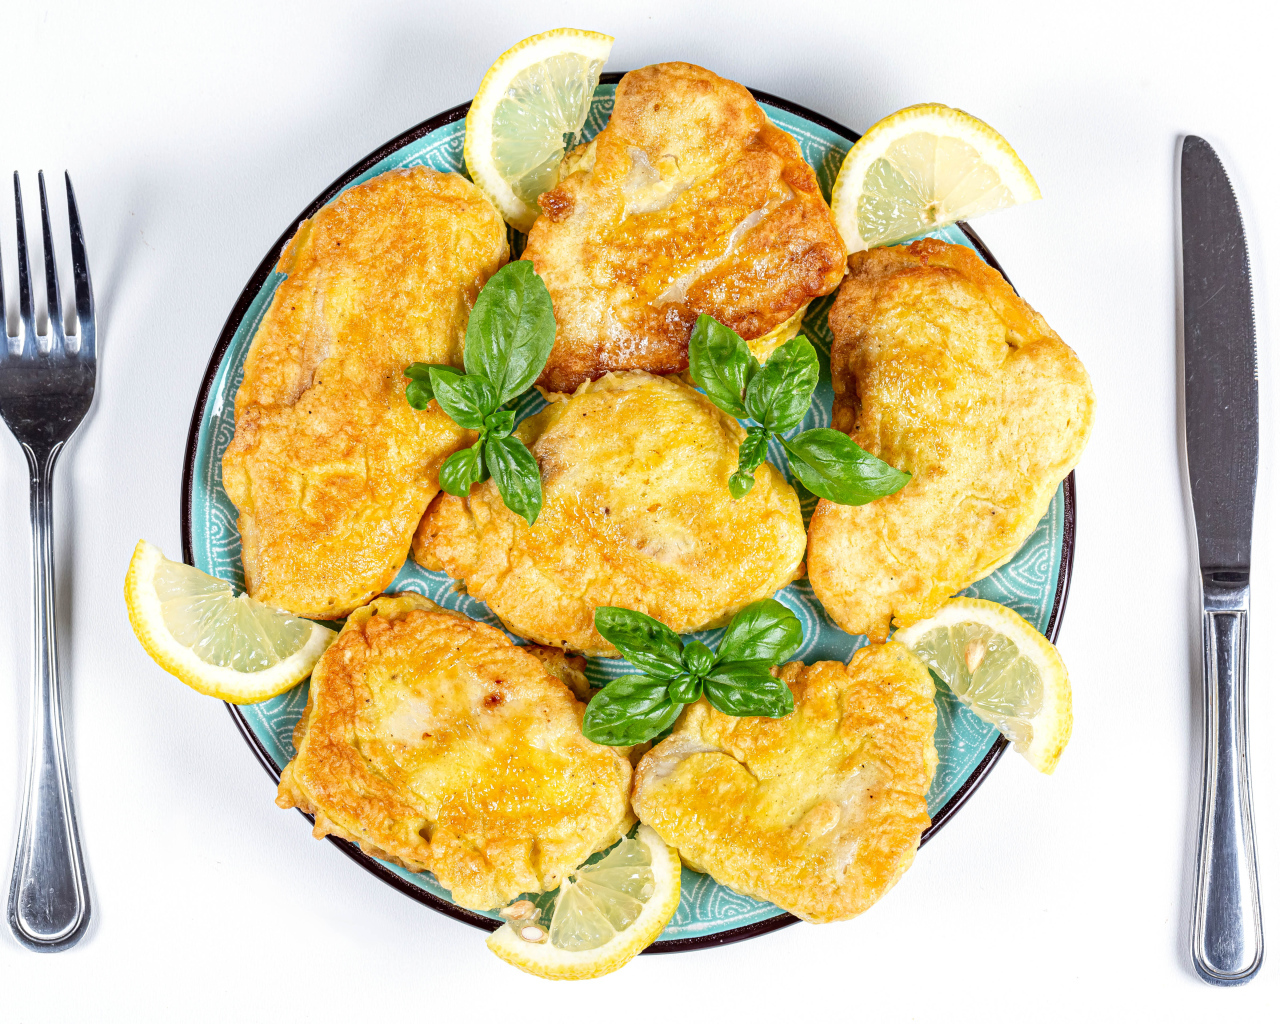 Appetizing fish in batter on a plate with lemon slices and cutlery